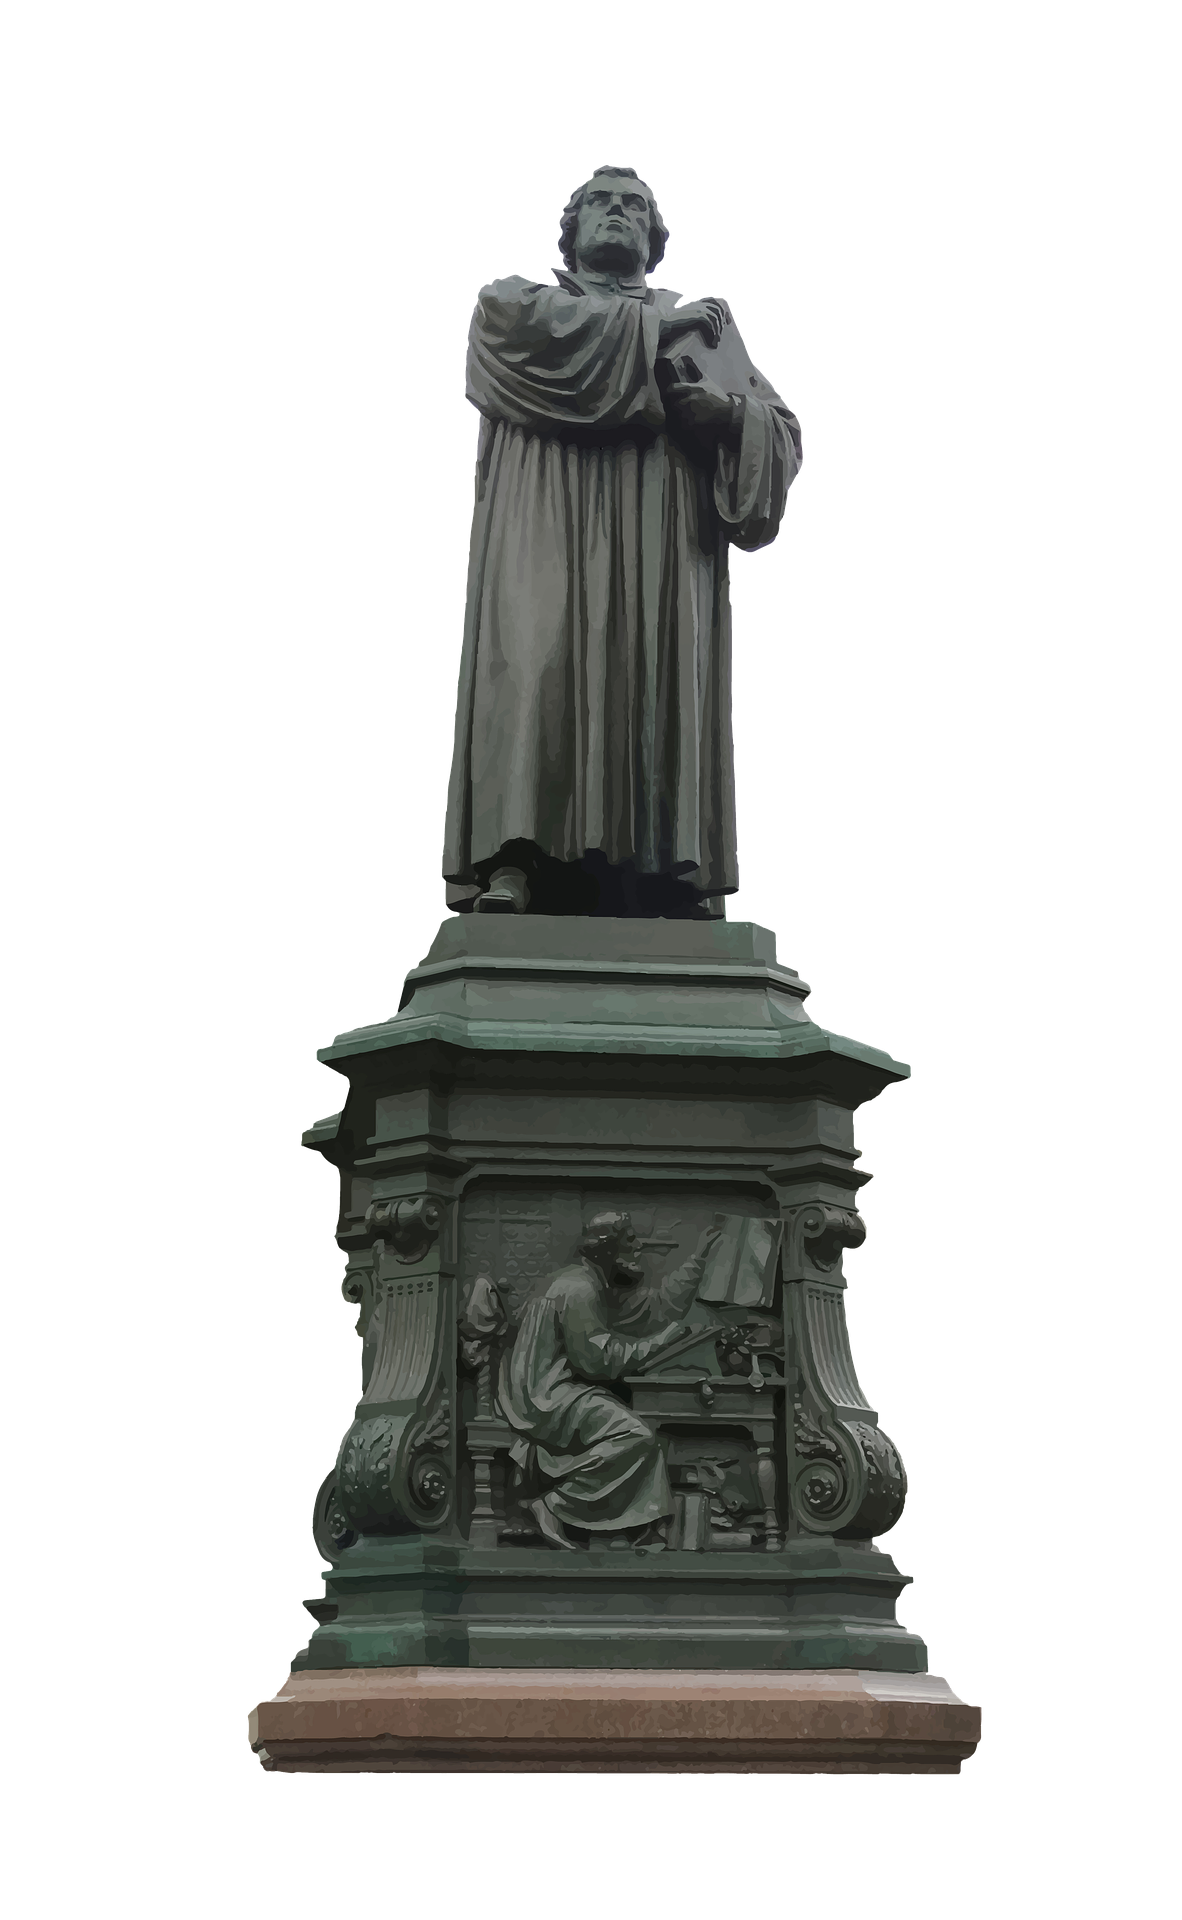 A Statue Of A Man With A Robe